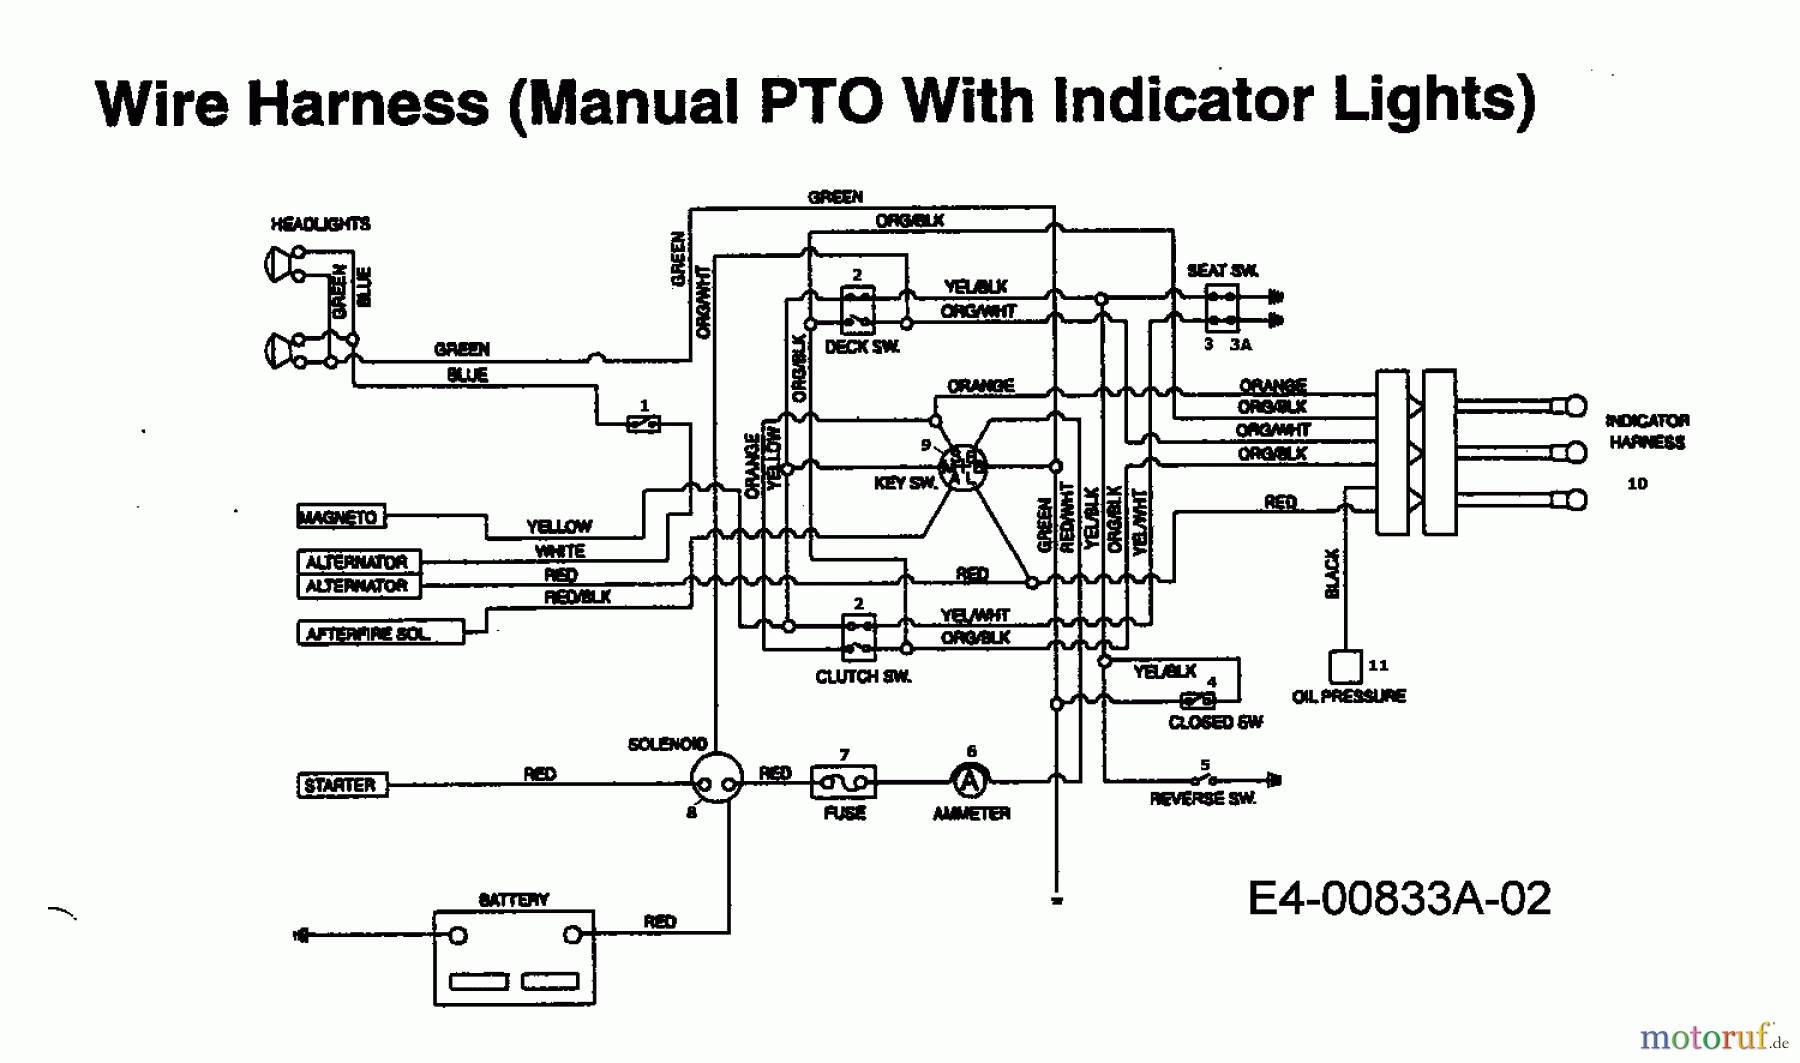  Mastercut Lawn tractors 145/102 H 13CP792N659  (1999) Wiring diagram with indicator lights